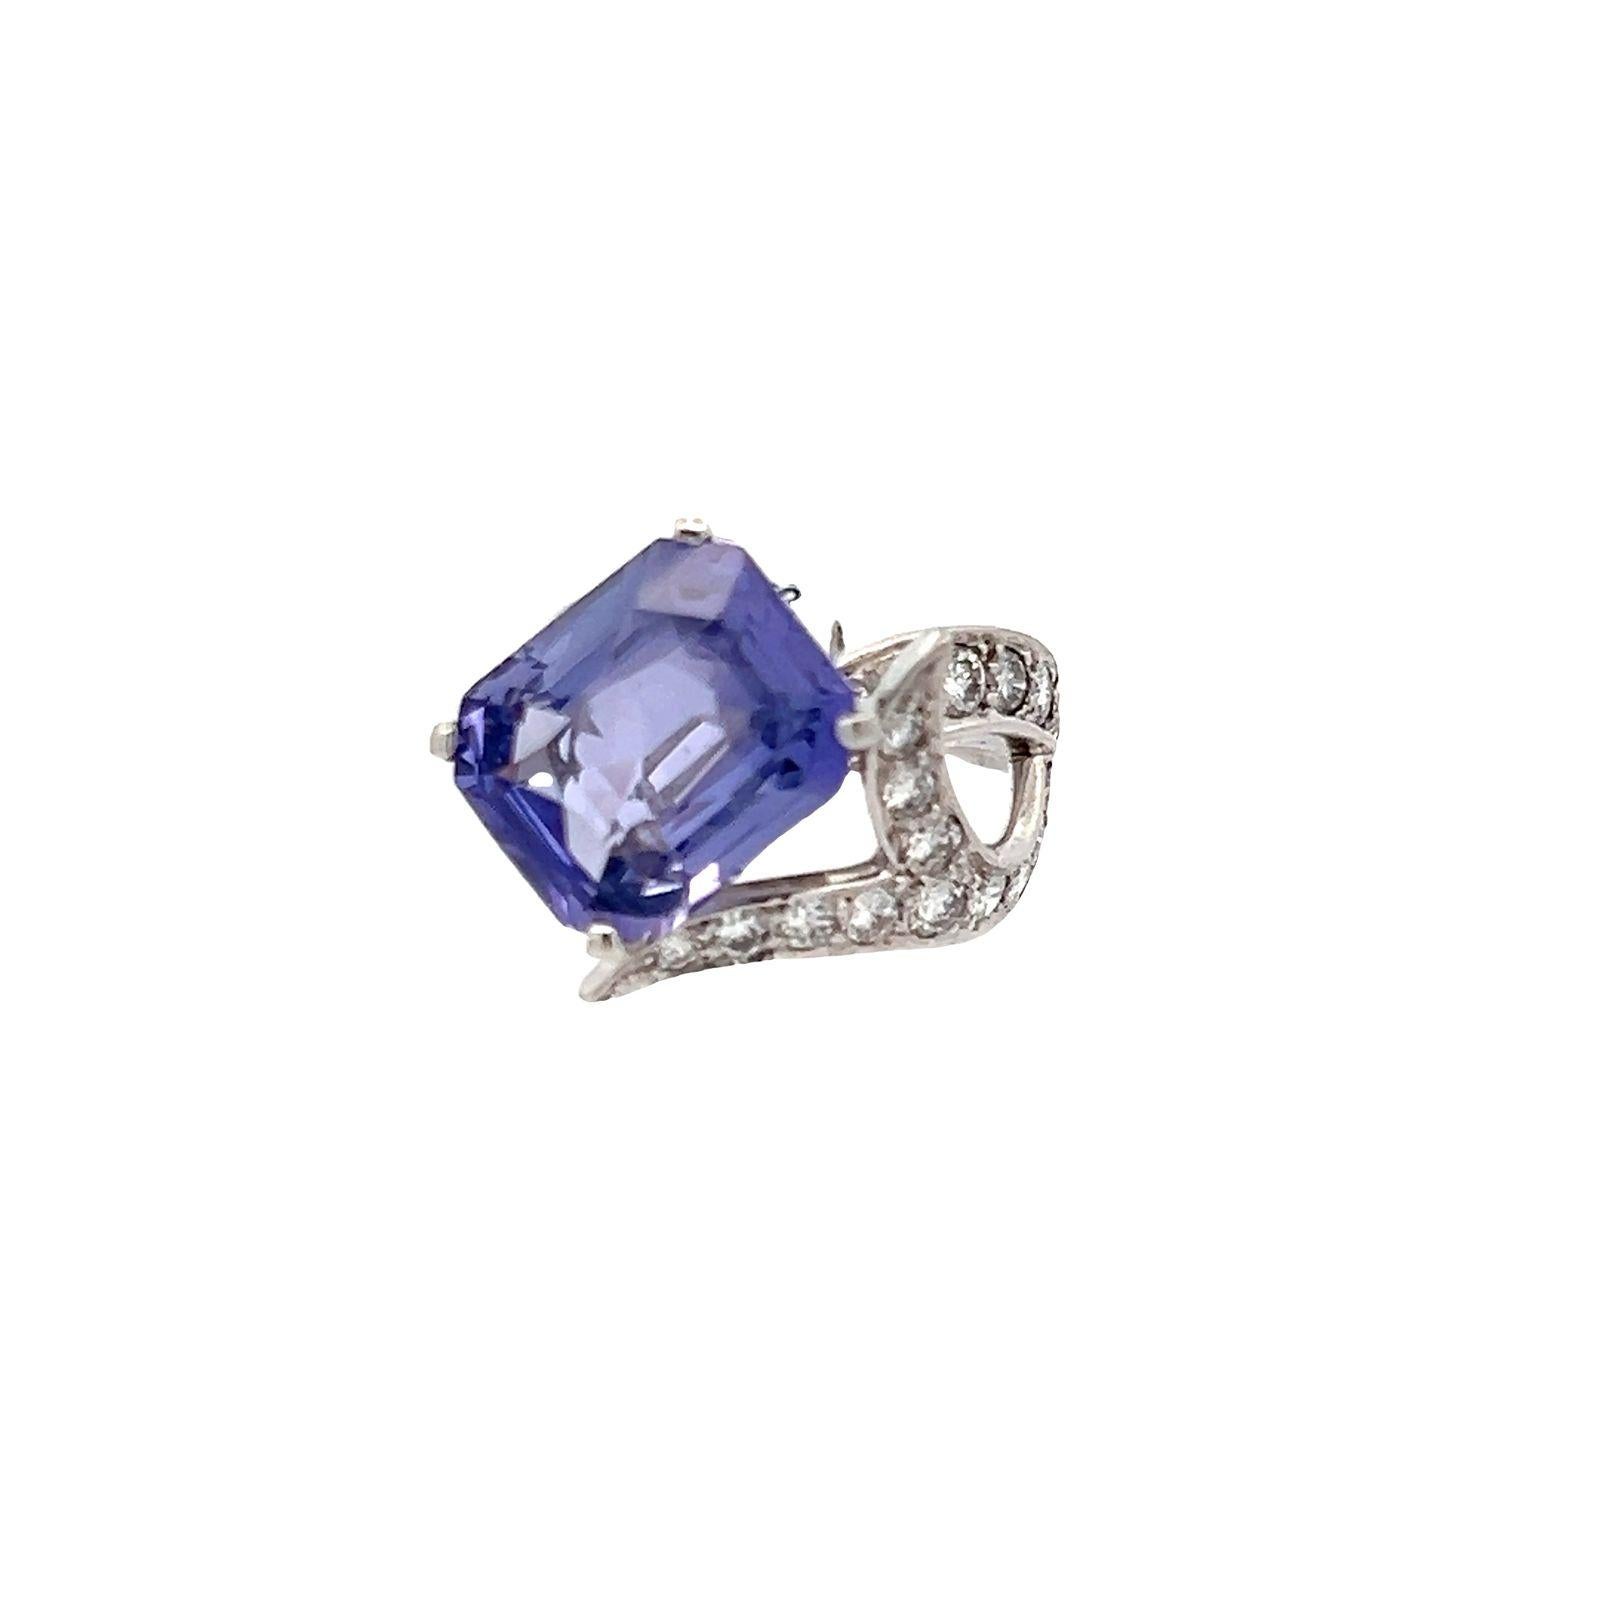 Women's or Men's GIA Certified 6.19 Carat Color Change Sapphire Cocktail Ring For Sale